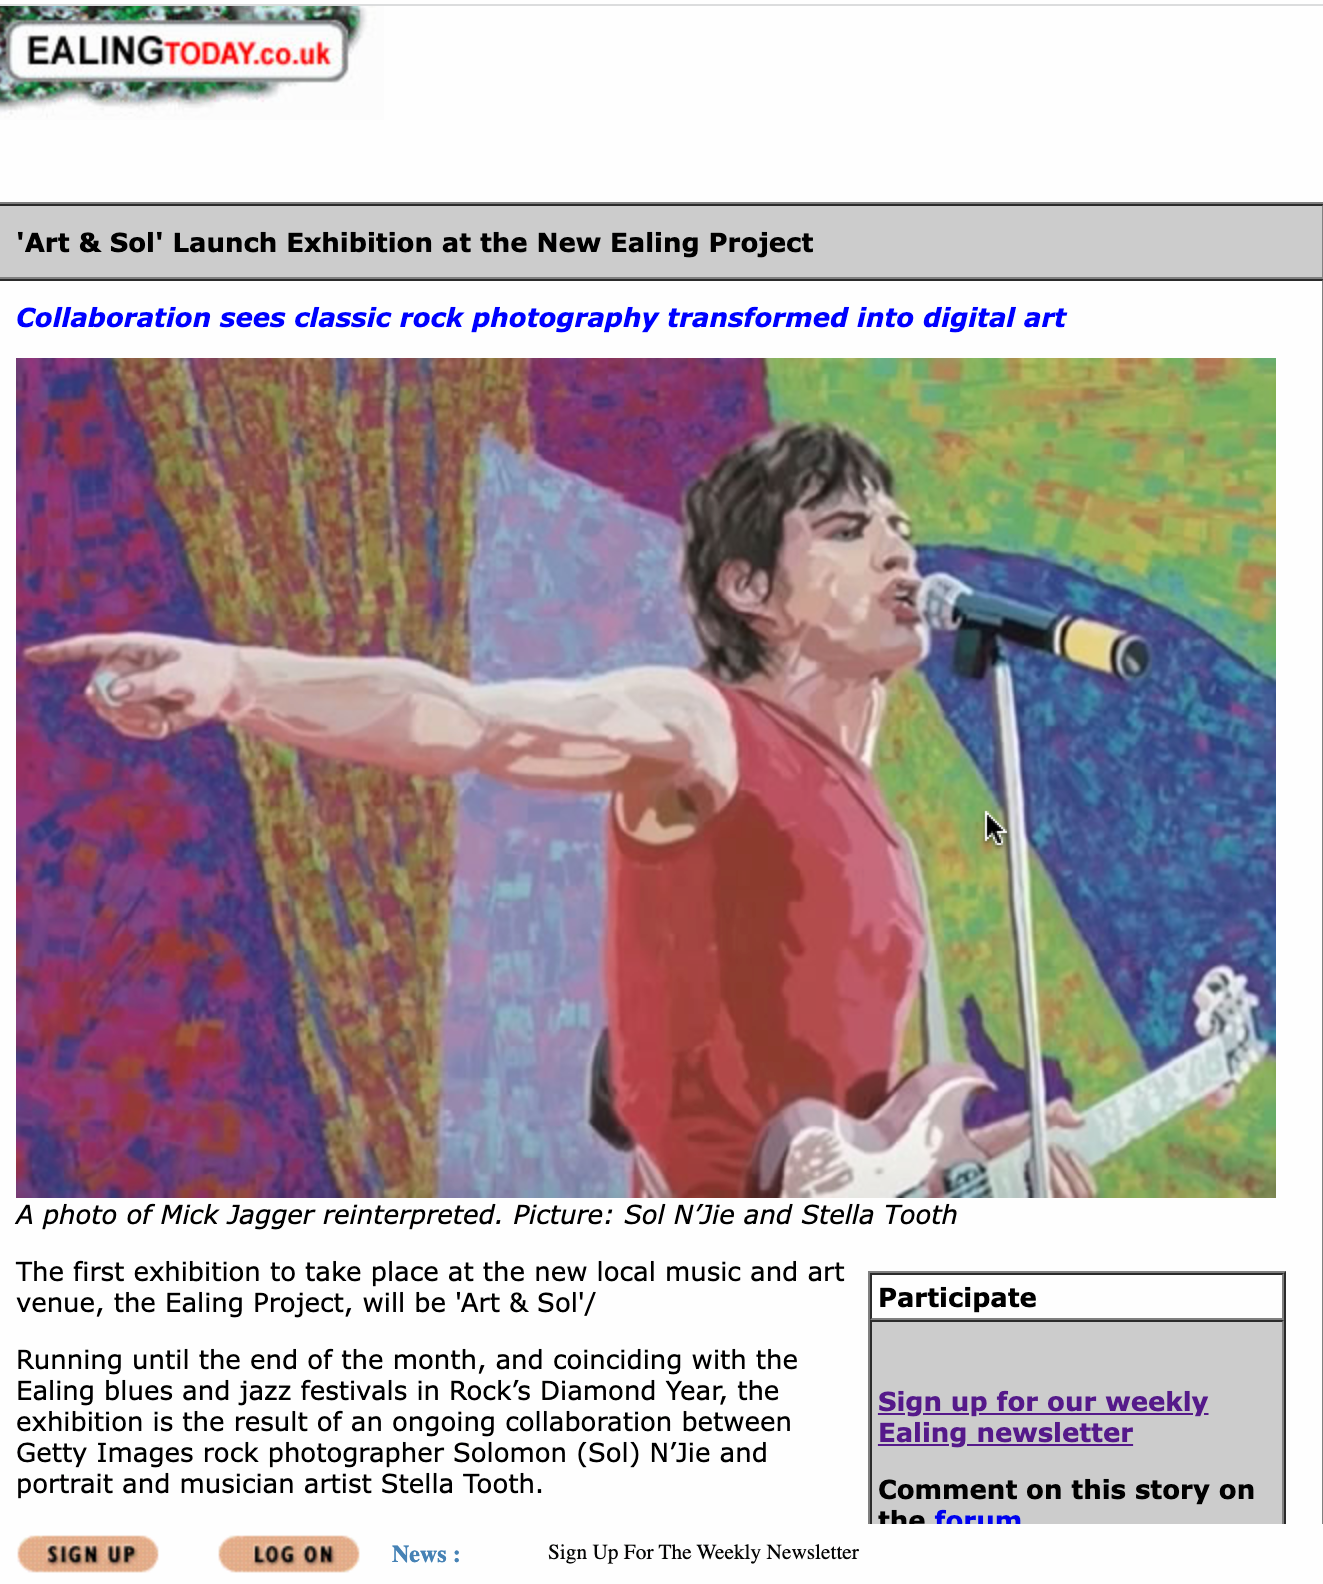 Ealing Today news story on Art & Sol exhibition of work of Sol N'Jie photographer and musician artist Stella Tooth who has reinterpreted his rock photos